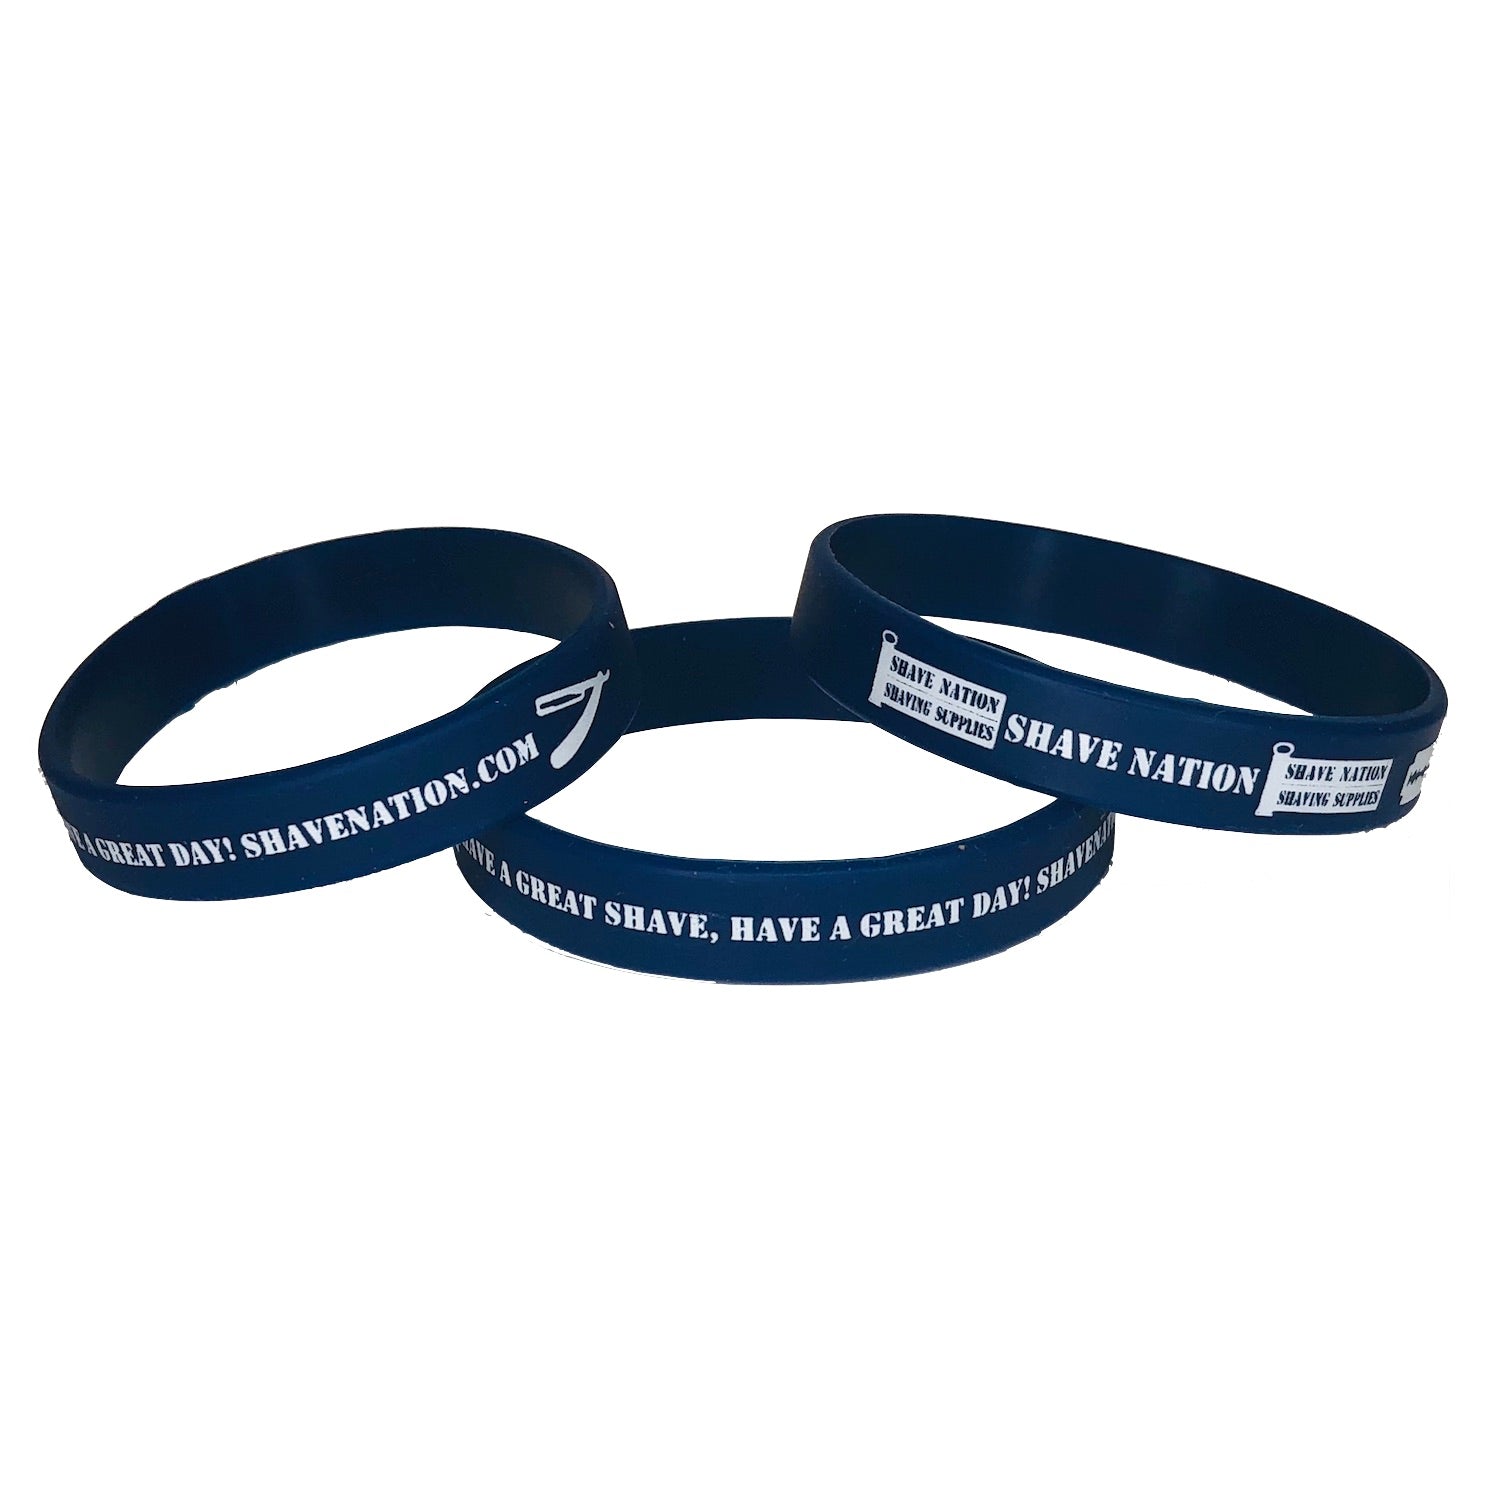 Shave Nation Wristband Navy Blue